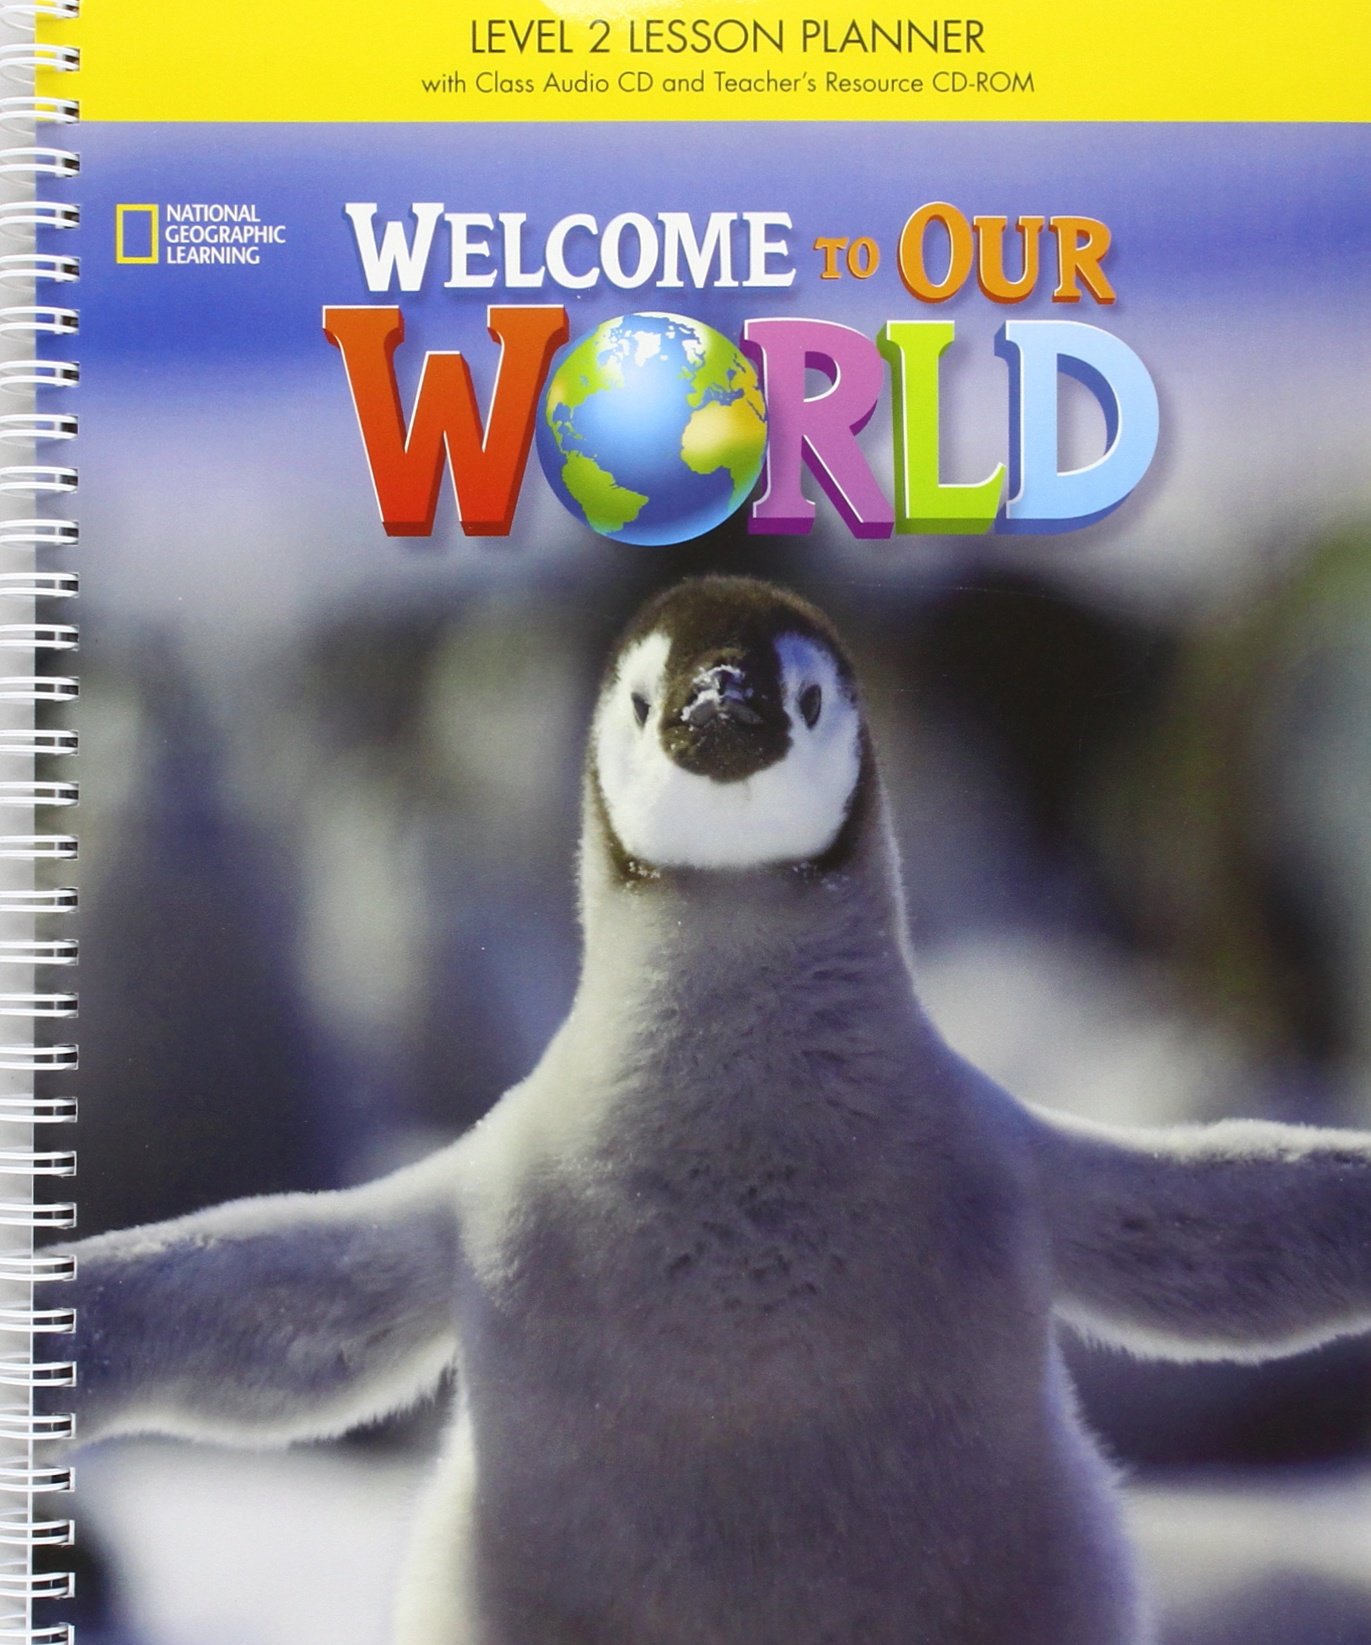 Welcome to Our World 2 Lesson Planner + Class CD + CD-ROM / Книга для учителя